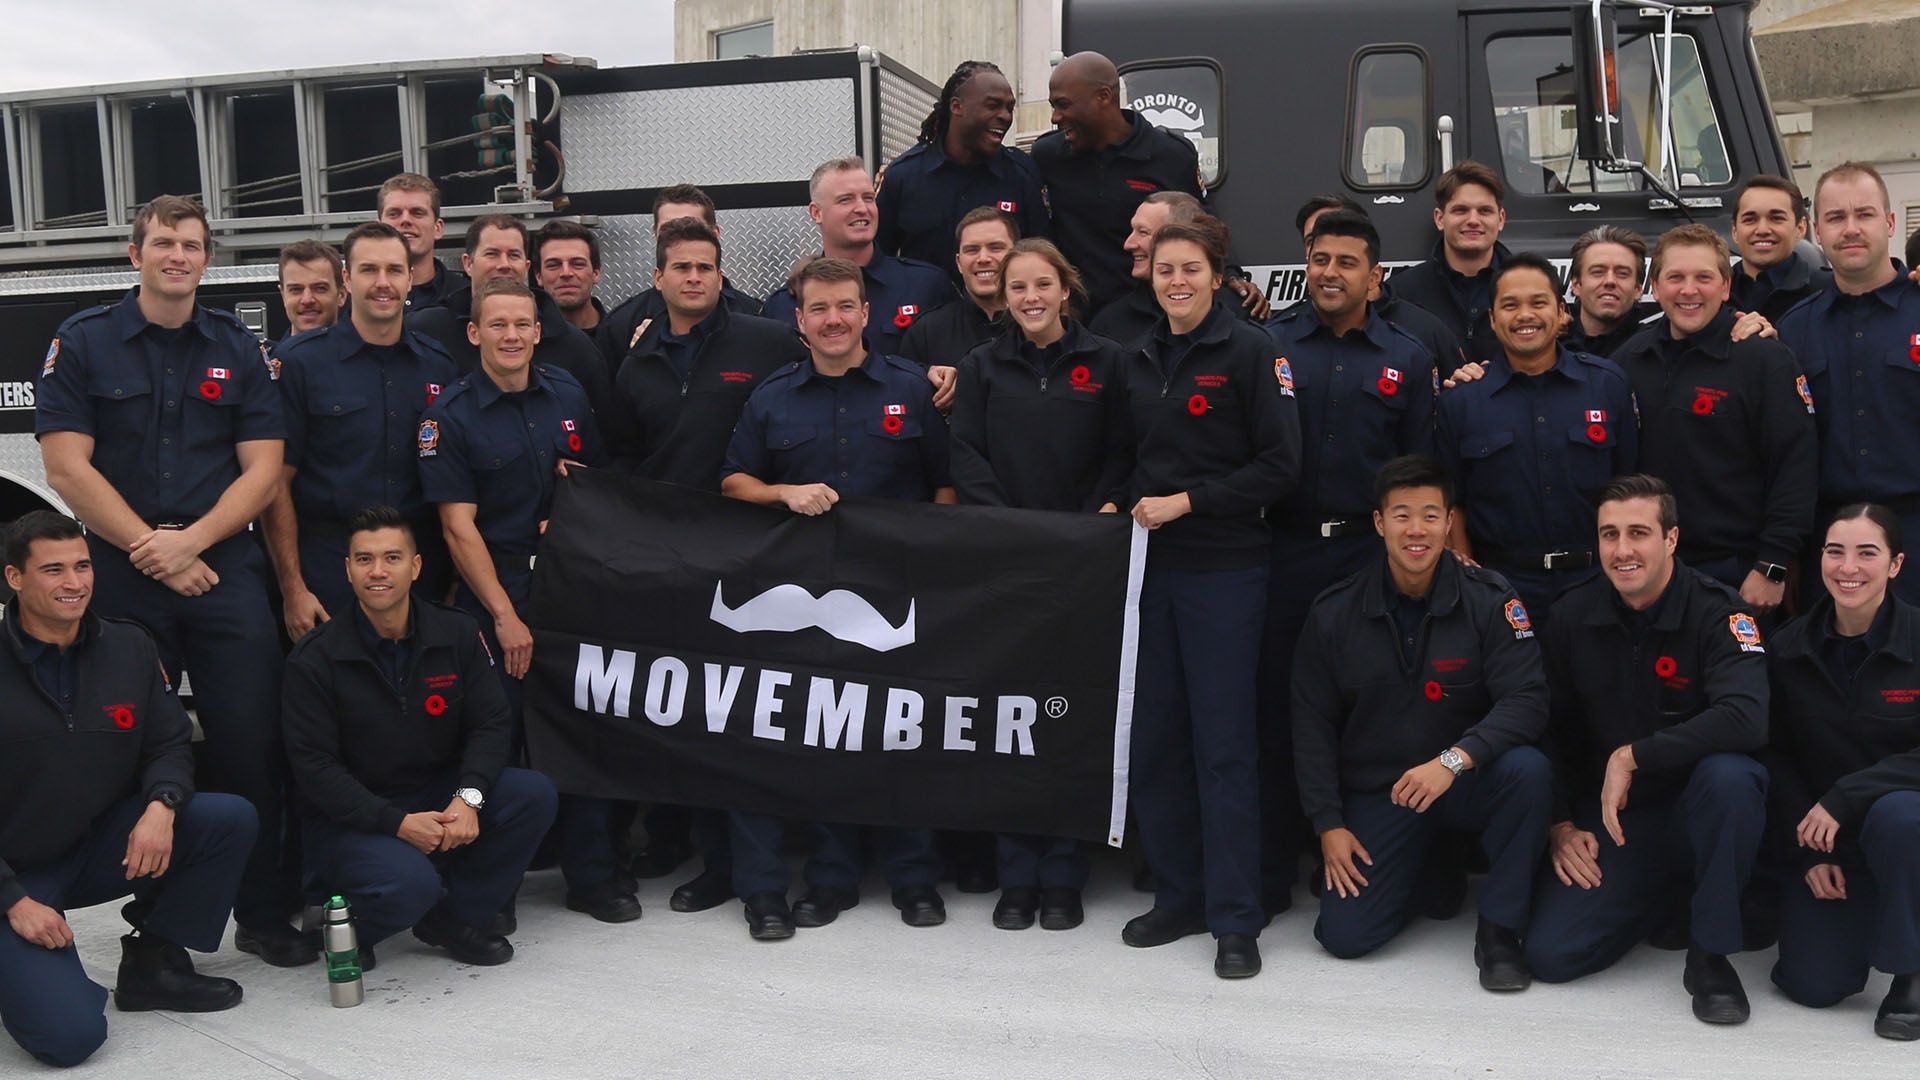 A full fire station crew in uniform, posing to camera while holding a Movember banner.